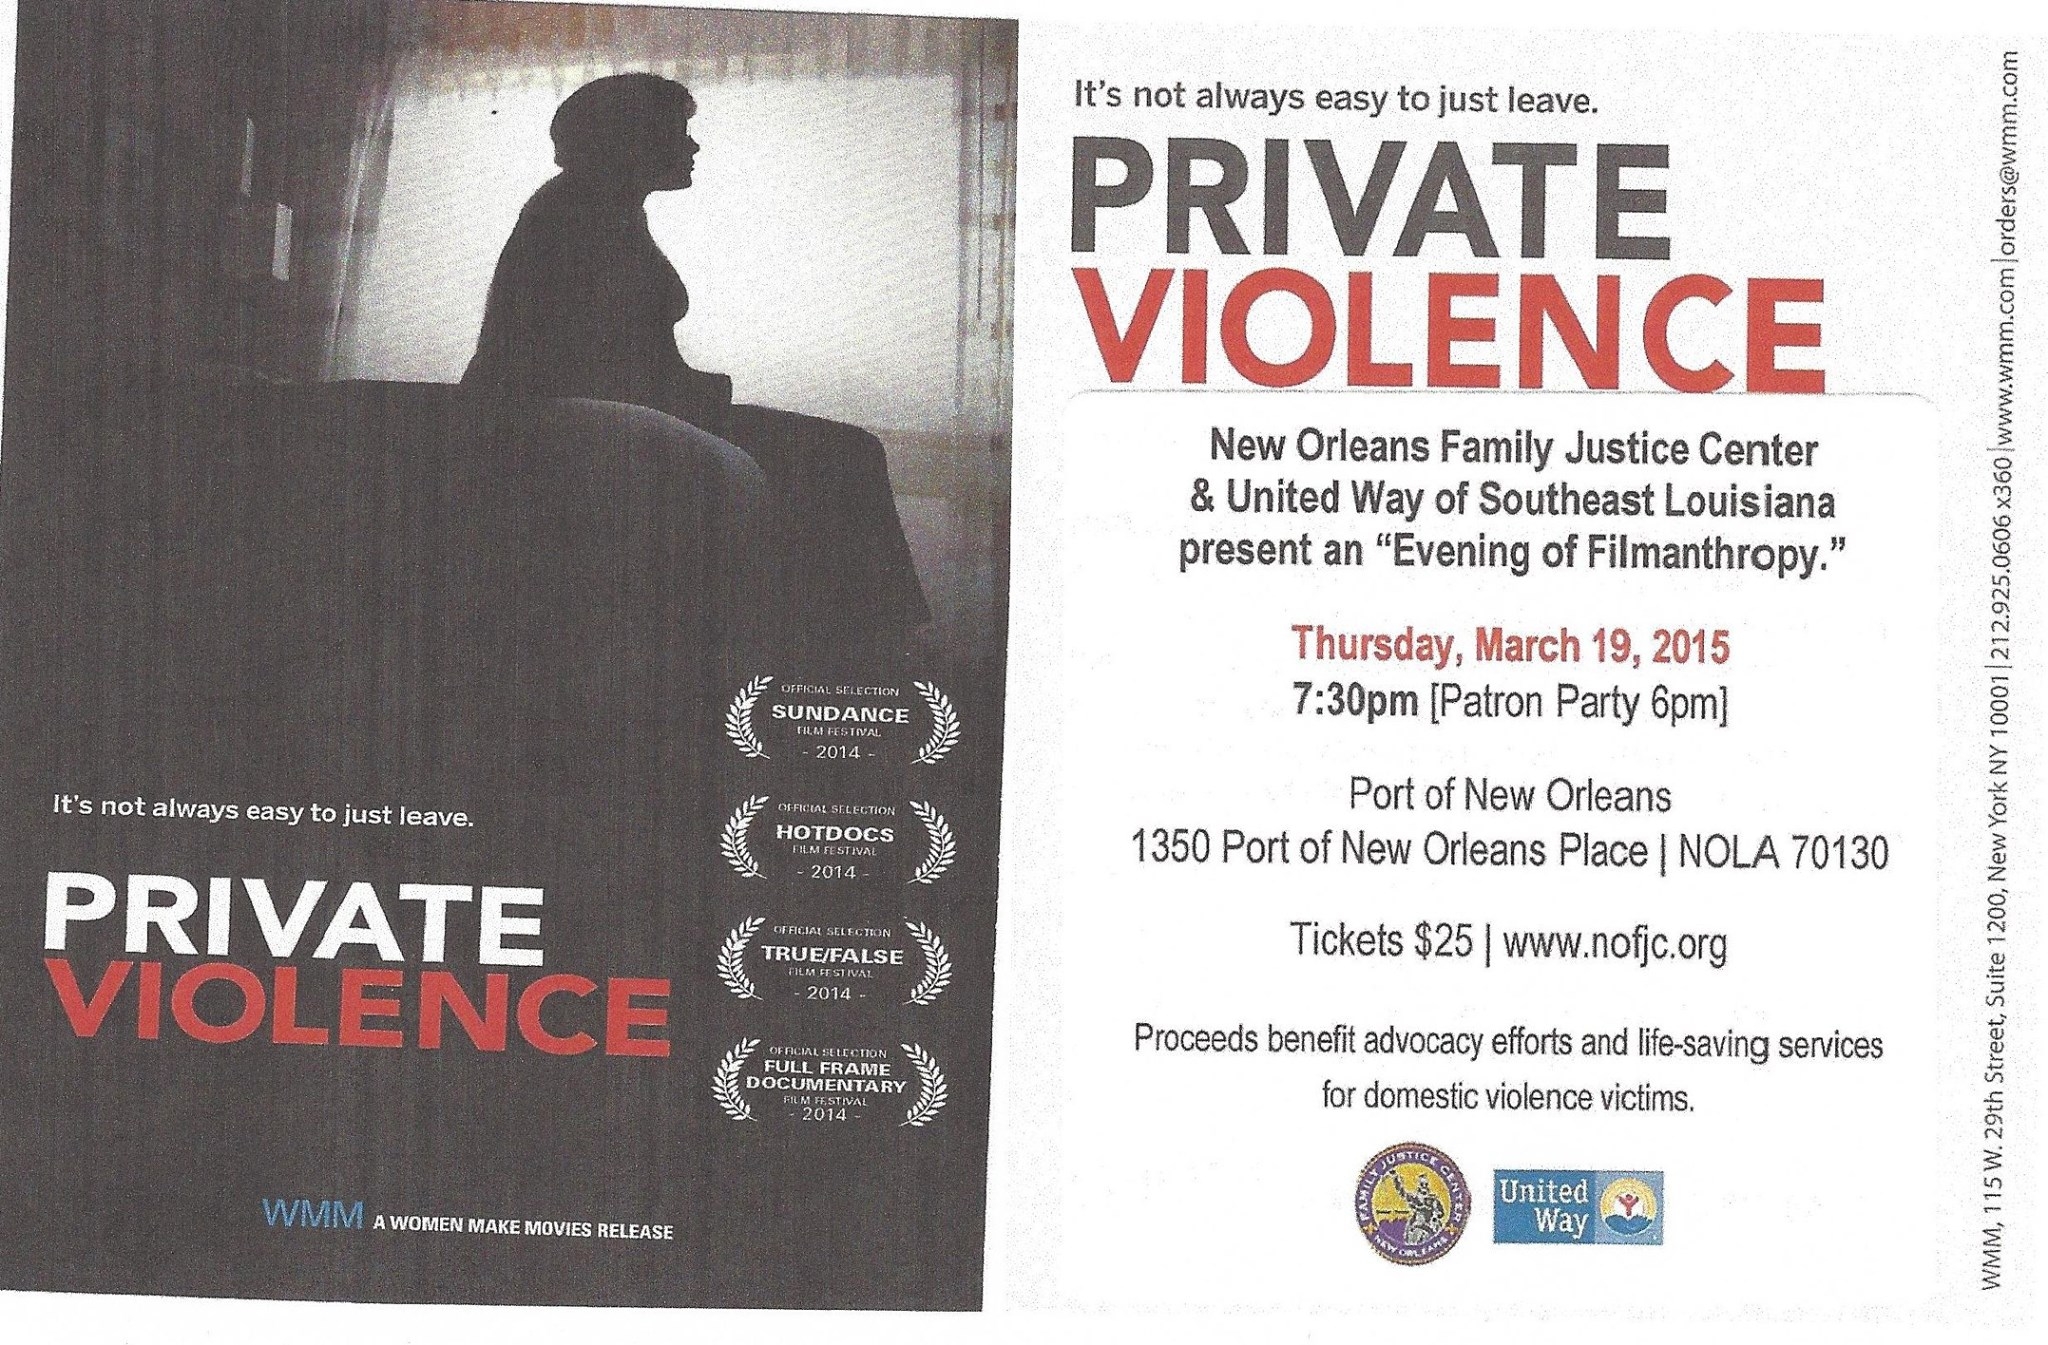 An Evening of Filmanthropy - "Private Violence"